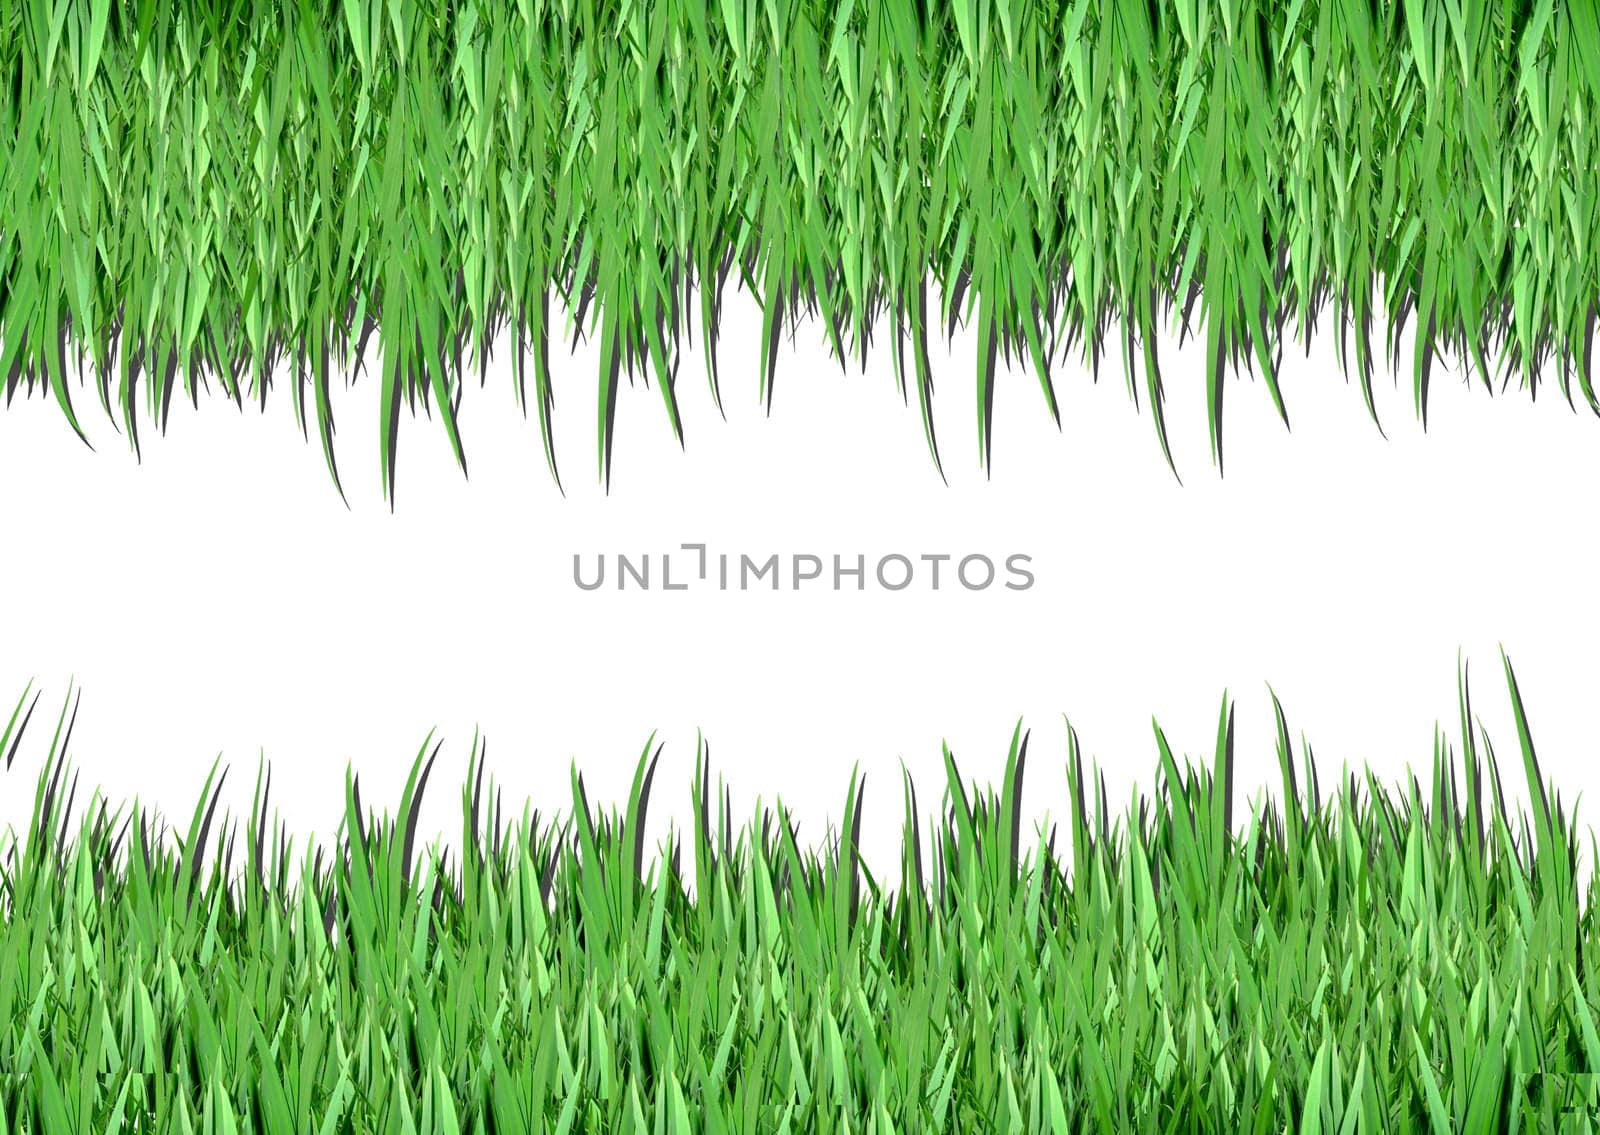 Over view of grass on white background